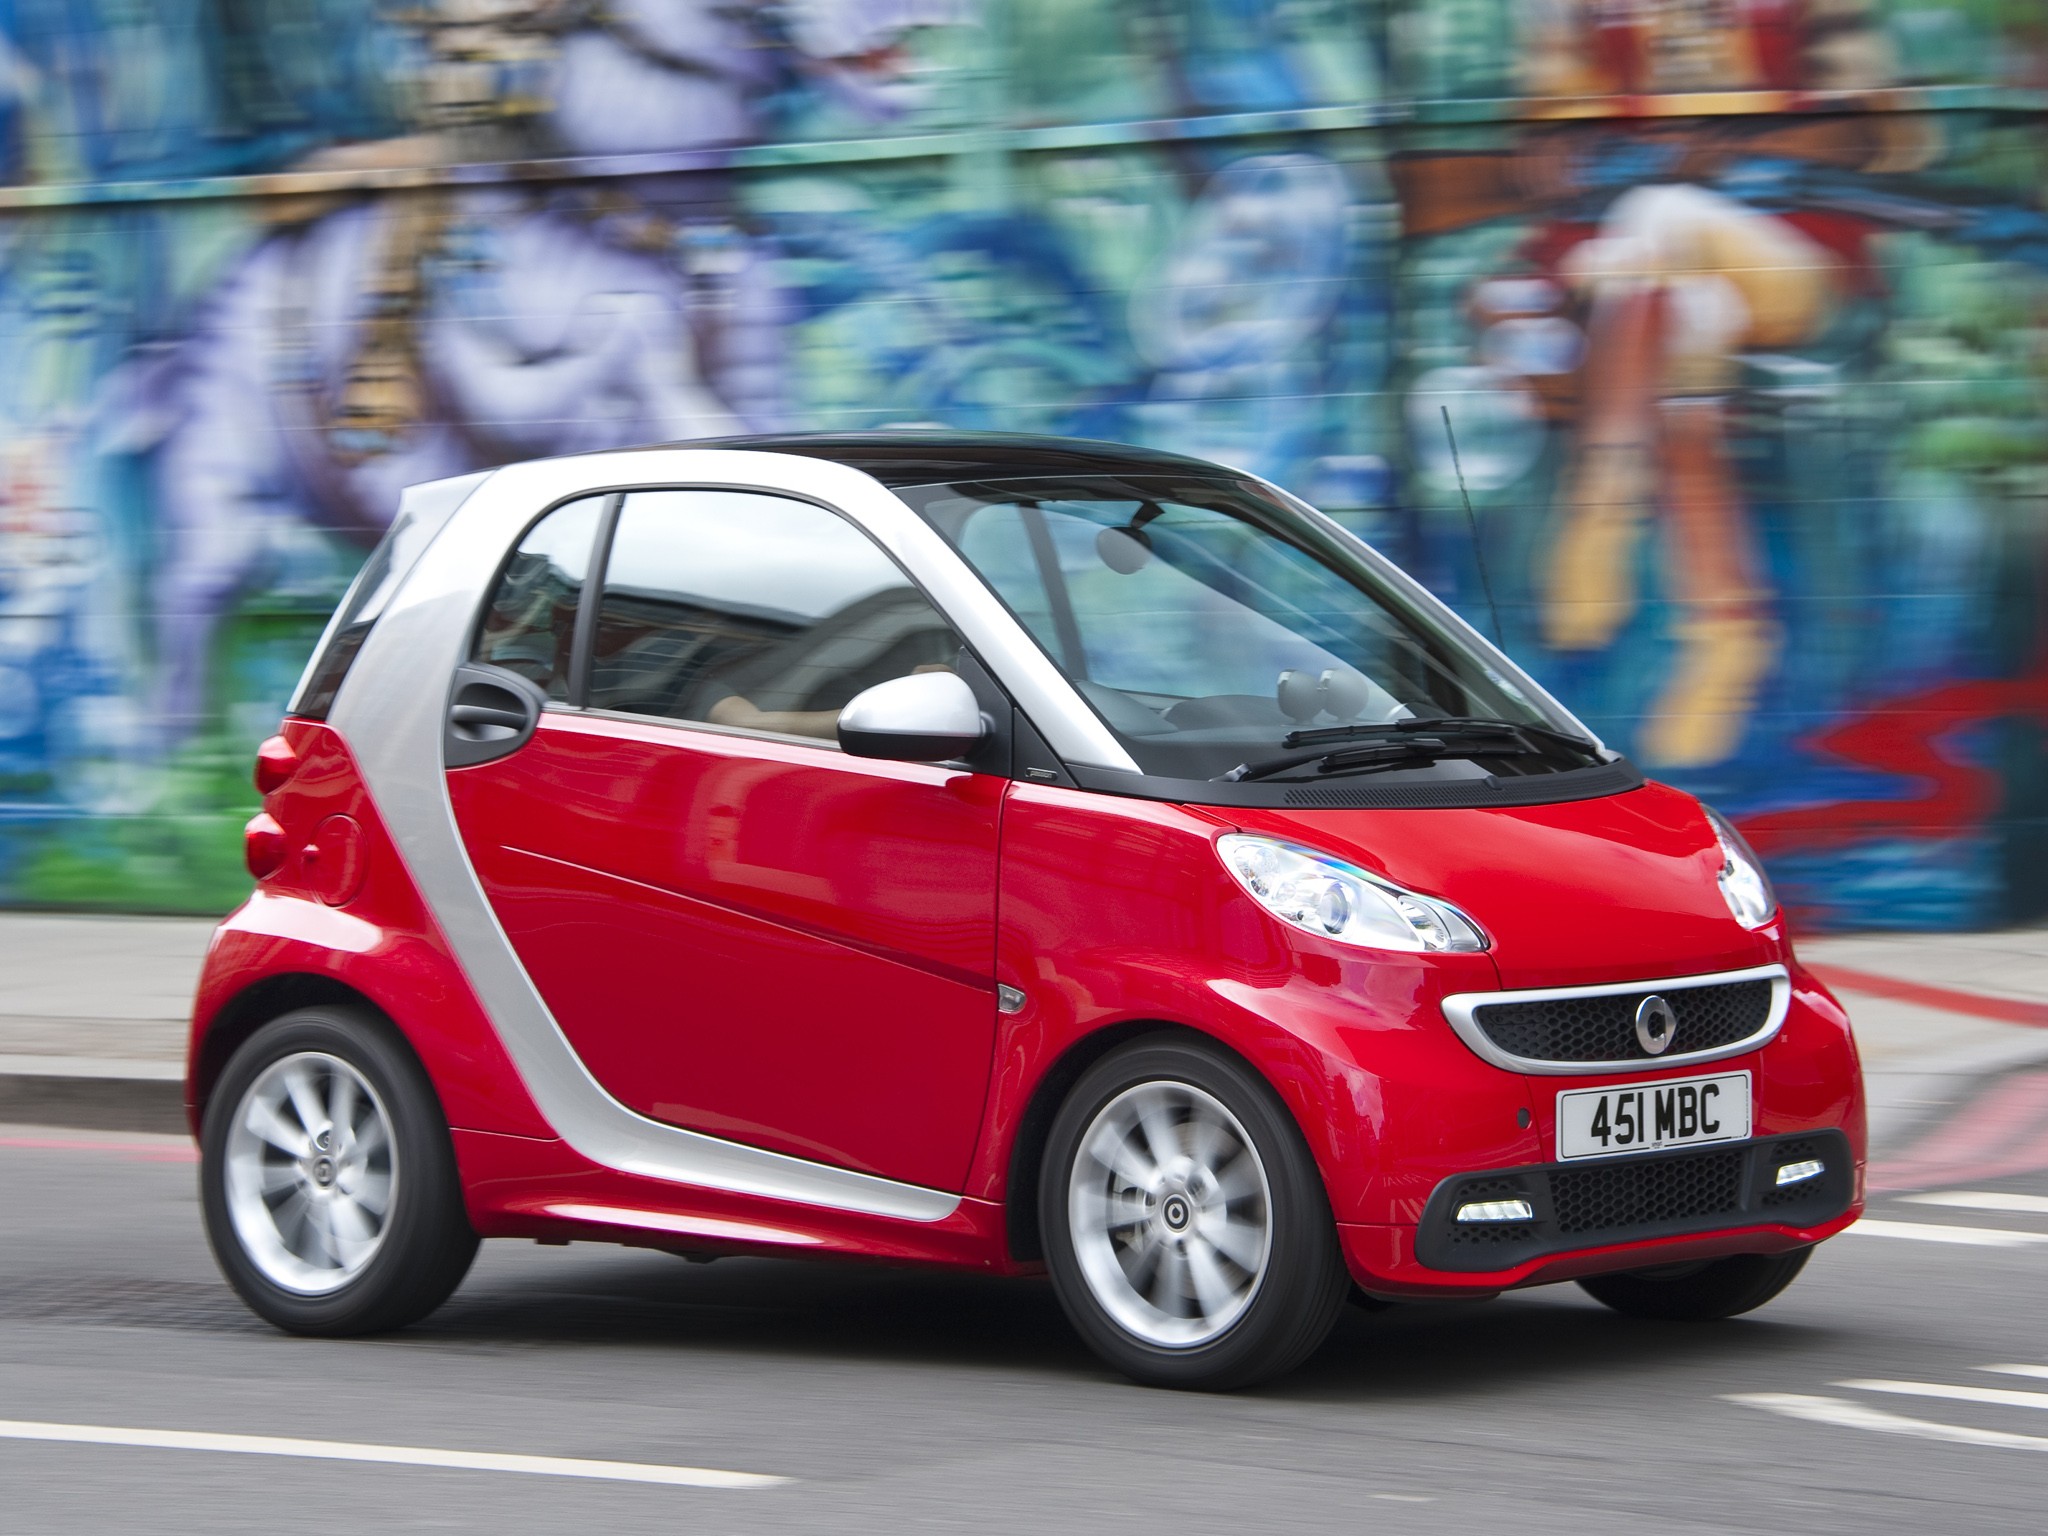 SMART ForTwo (2012, 2013, 2014) - photos, specs & model history